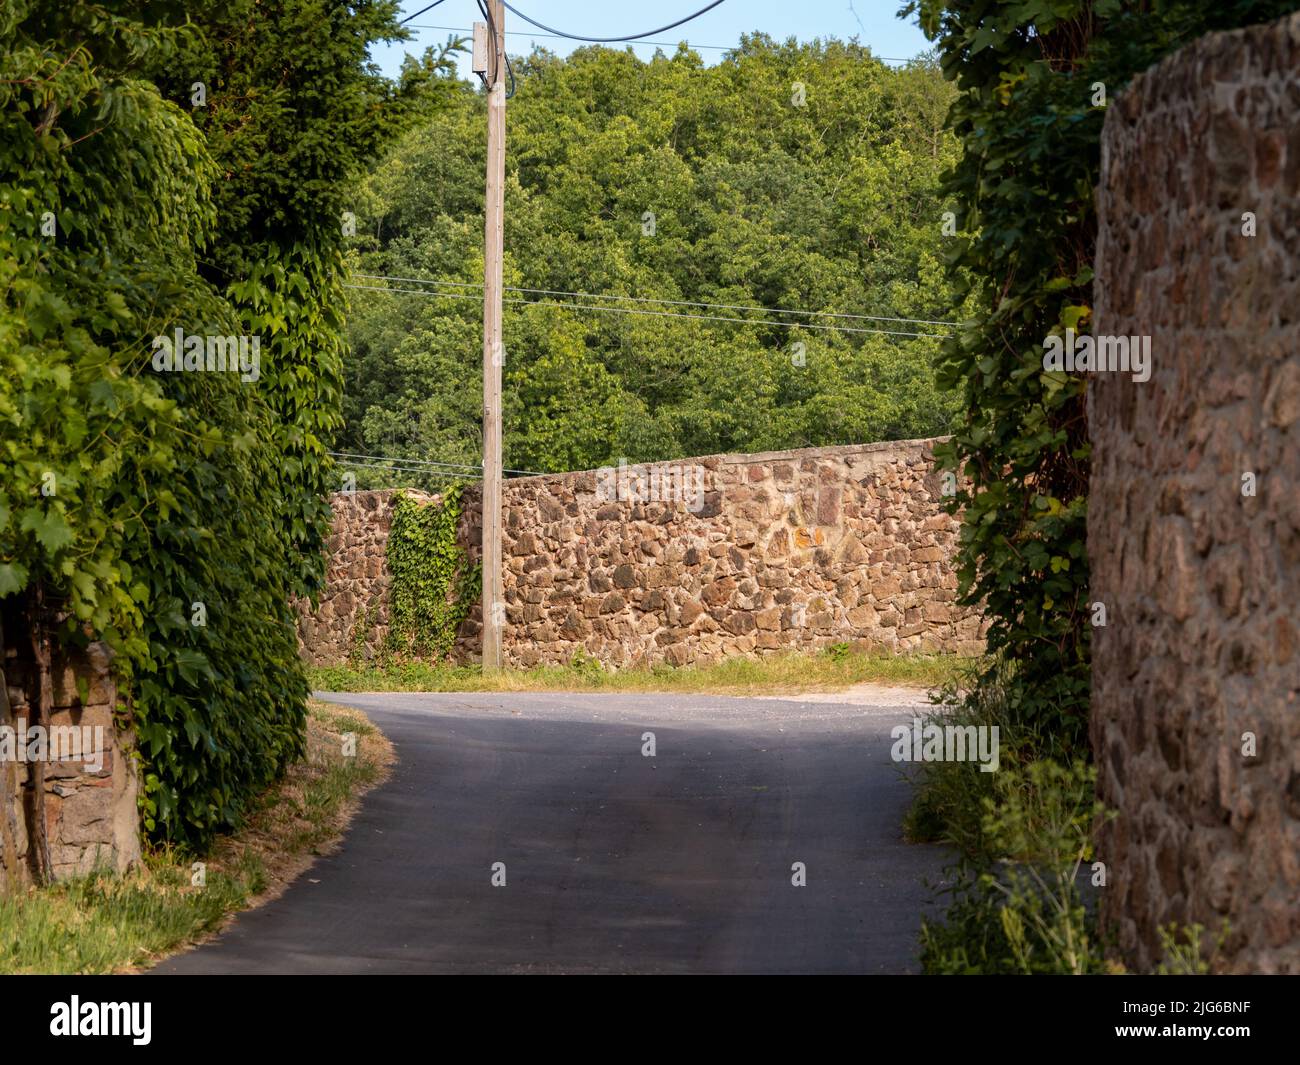 Empty street with big old stone walls and green trees. Asphalt road without any people. Traditional exterior in Europe. Lush foliage in the summer. Stock Photo